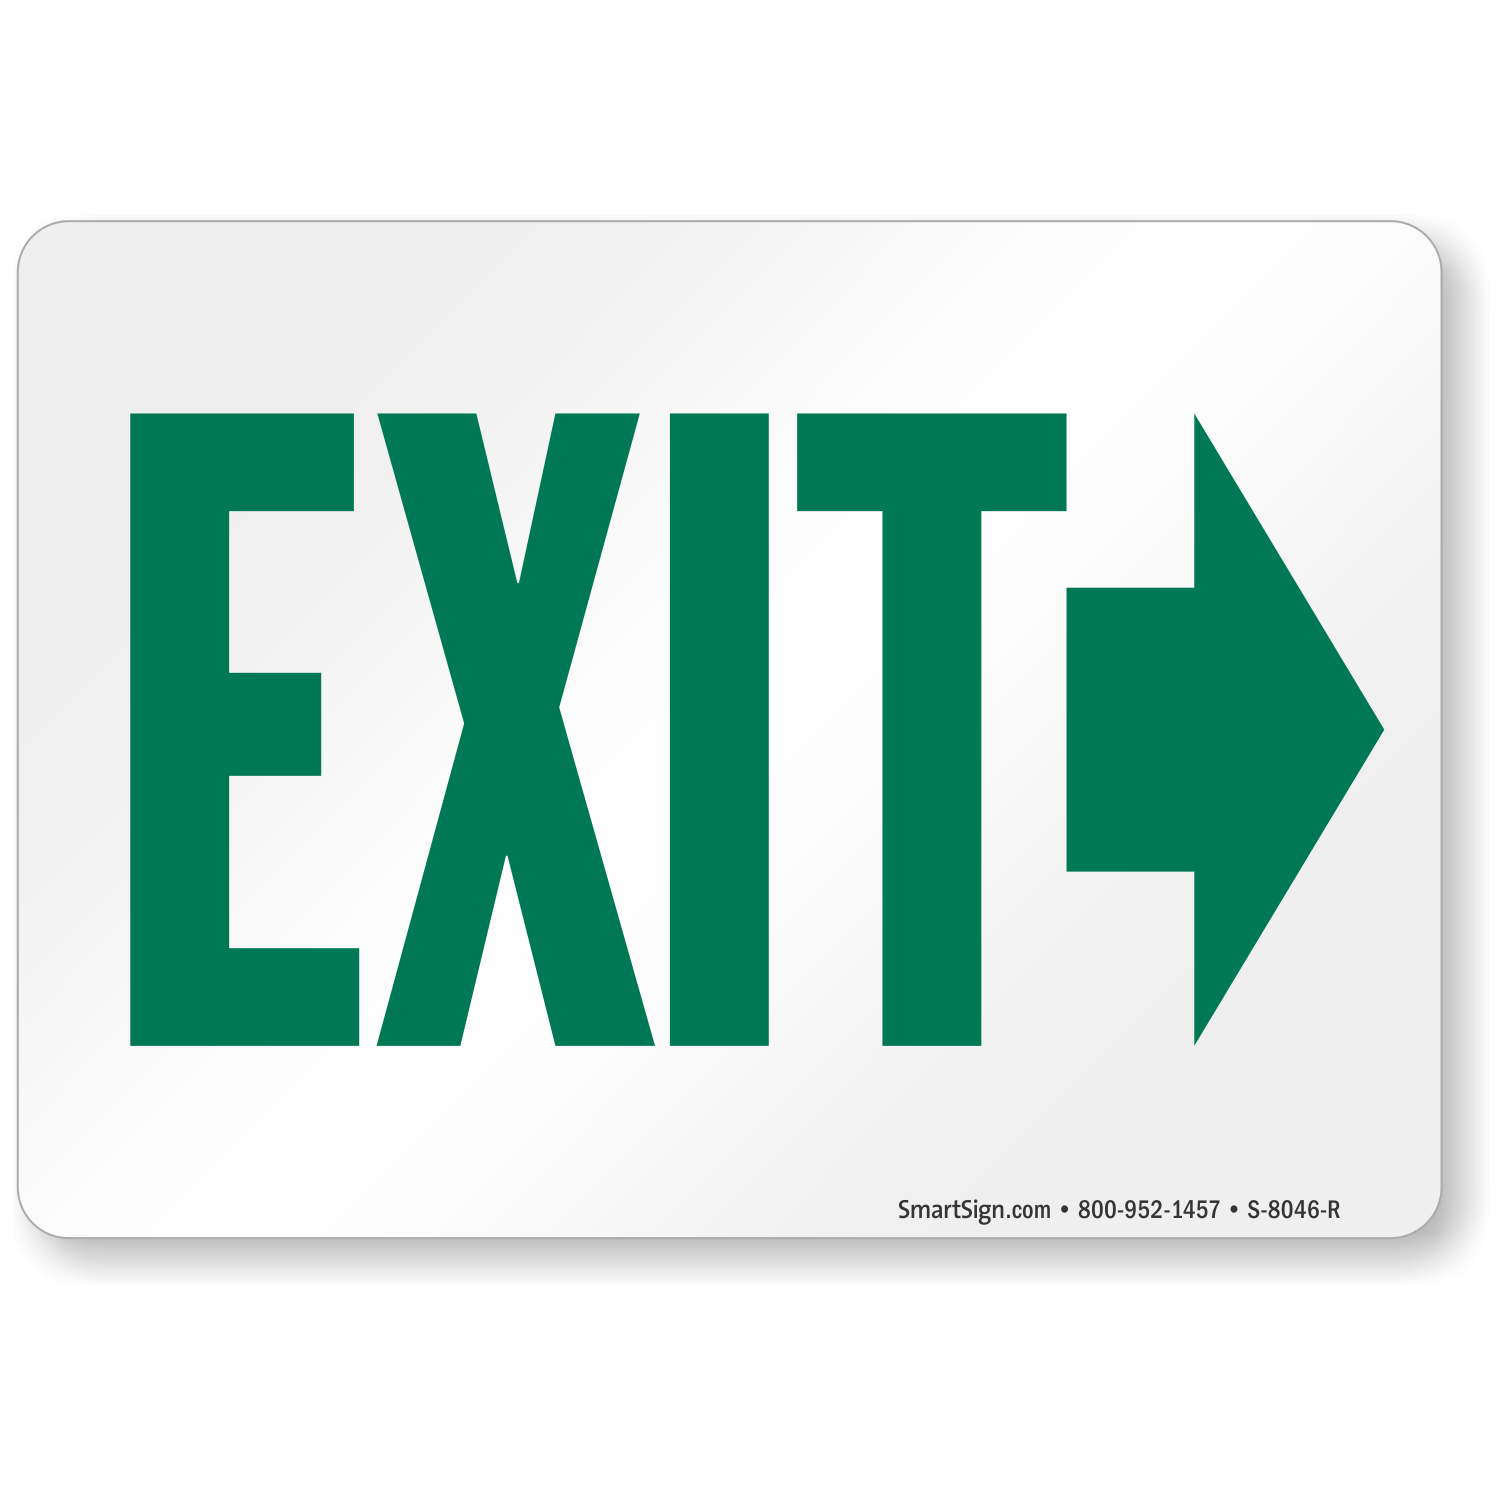 Exit Sign With Right Arrow